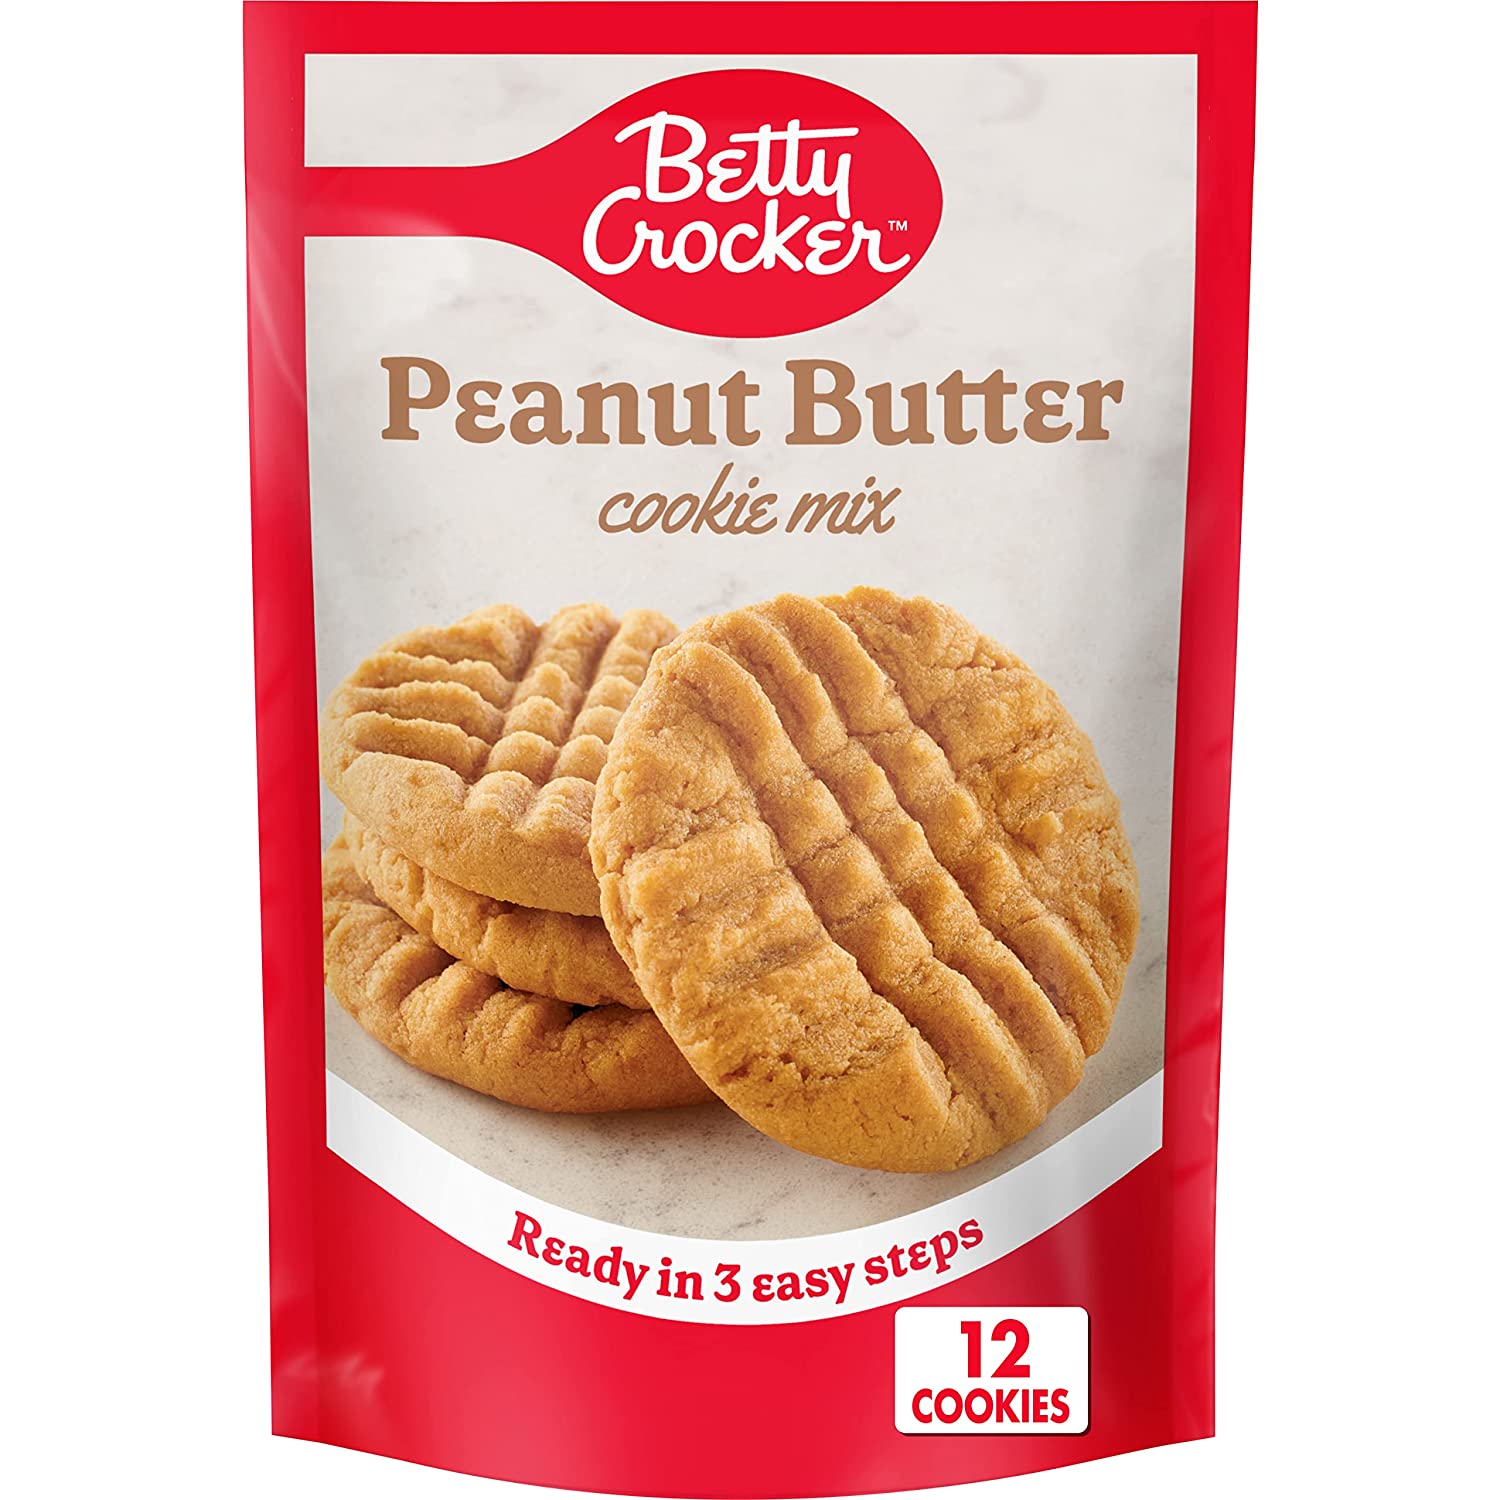 7.2-Oz. Betty Crocker Peanut Butter Snack Size Cookie Mix $1.10 w/S&S + Free Shipping w/ Prime or on orders $25+